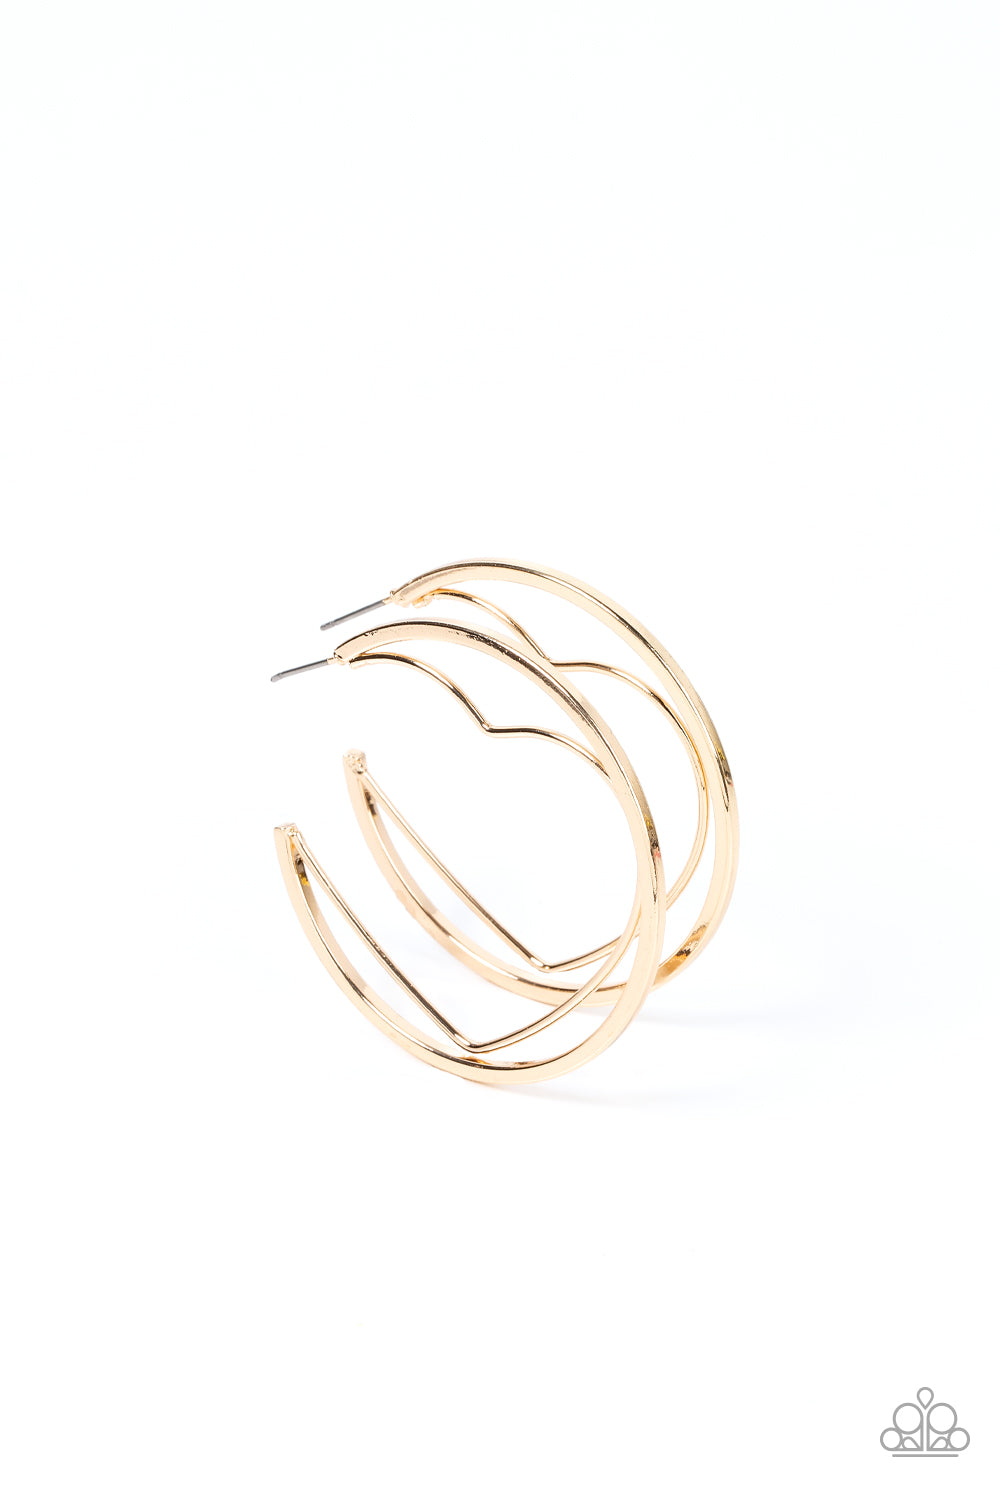 A gold wire heart is encircled in an oversized gold hoop, resulting in a heart-stopping shimmer